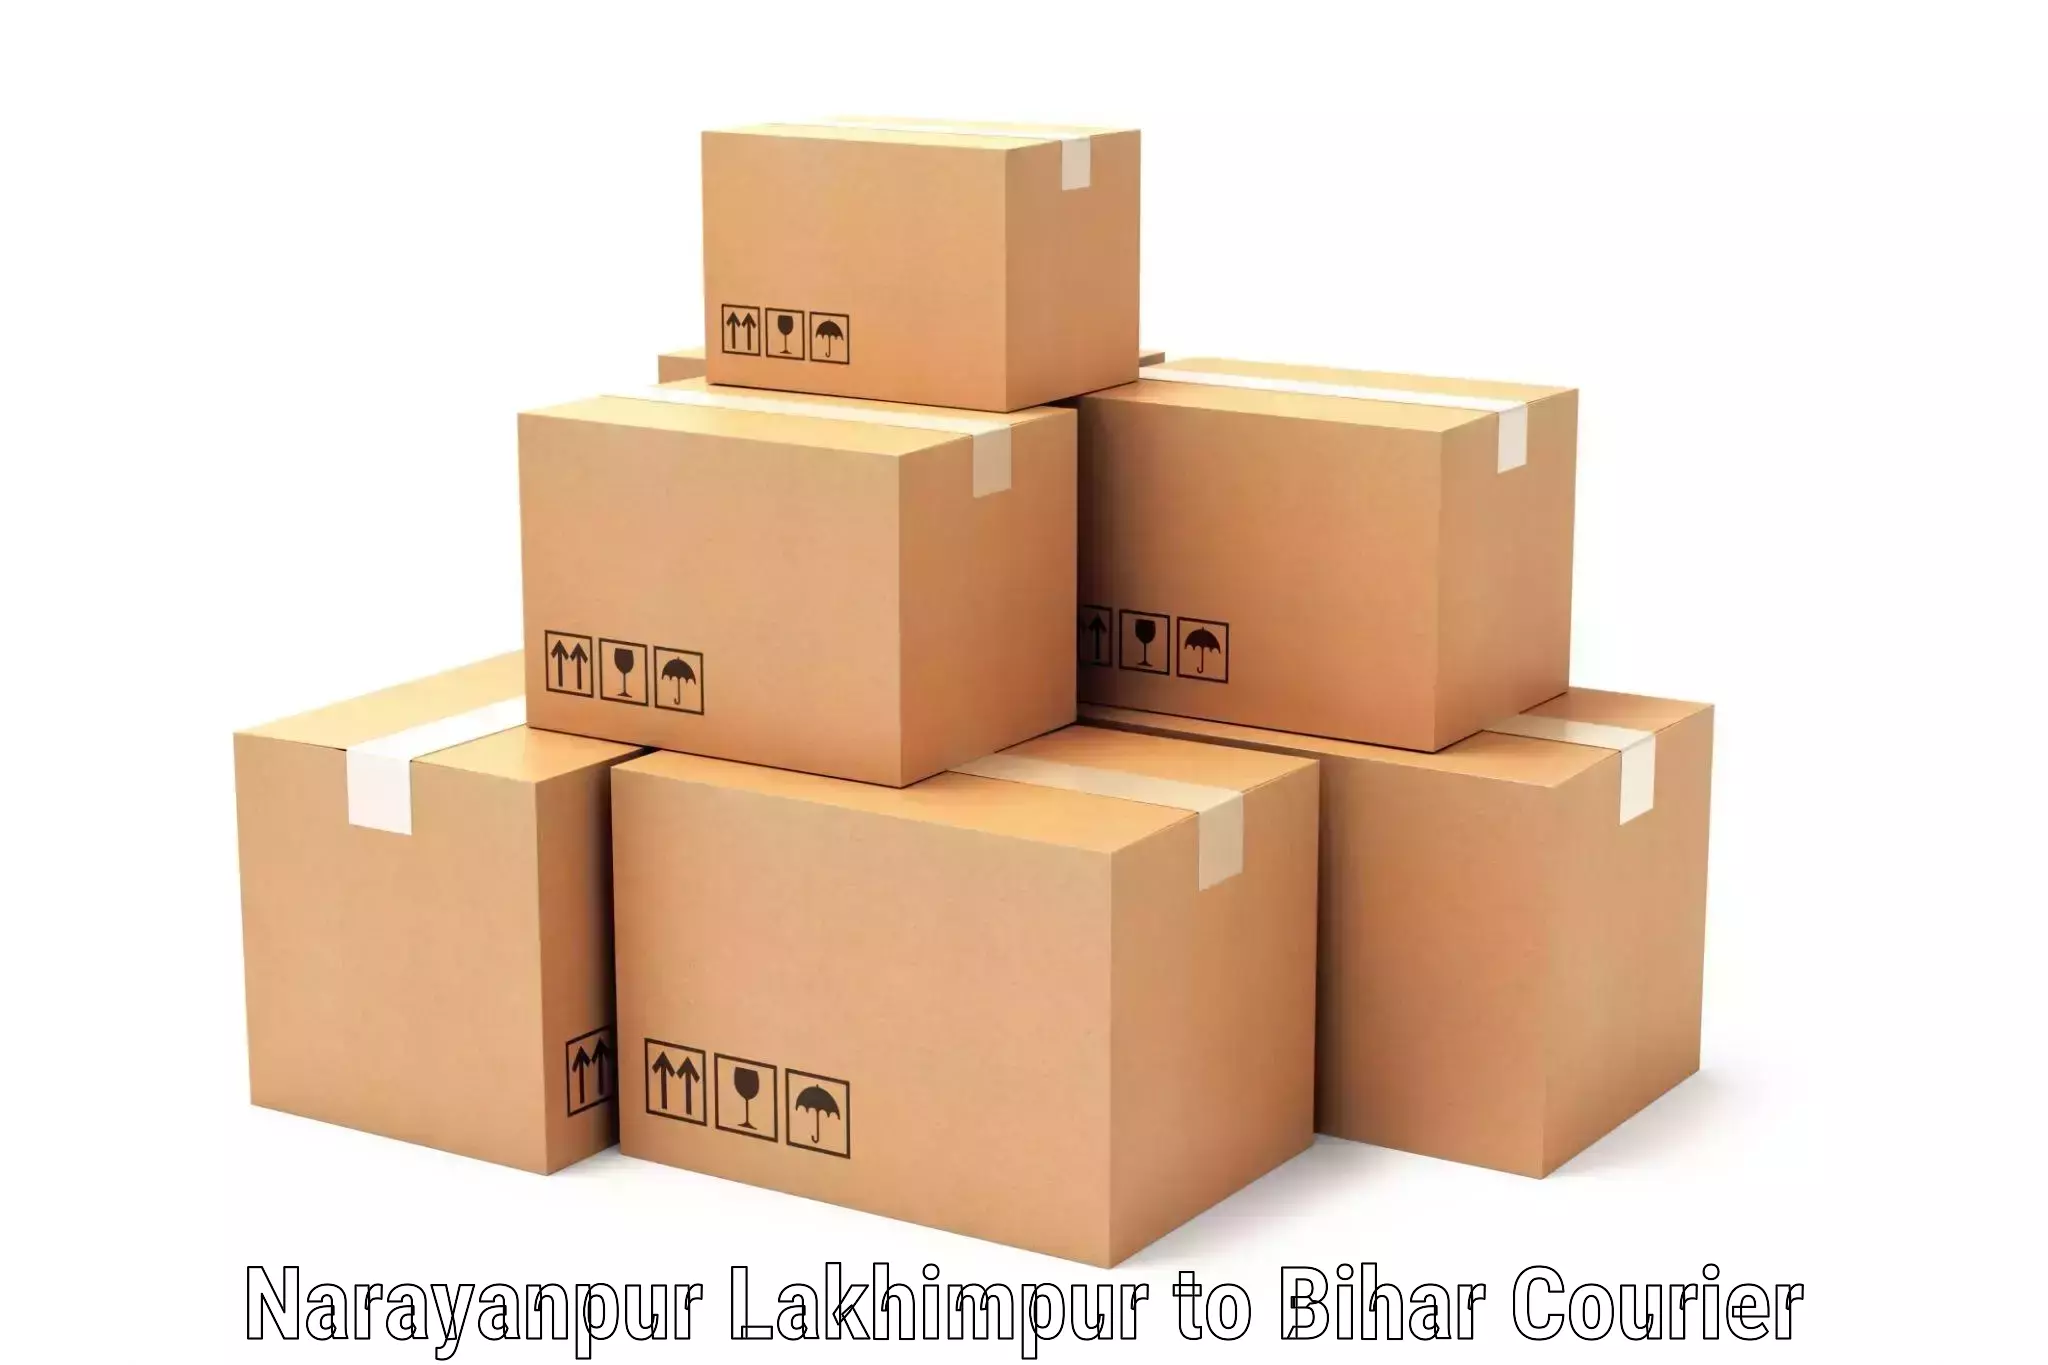 Customer-oriented courier services Narayanpur Lakhimpur to Bettiah